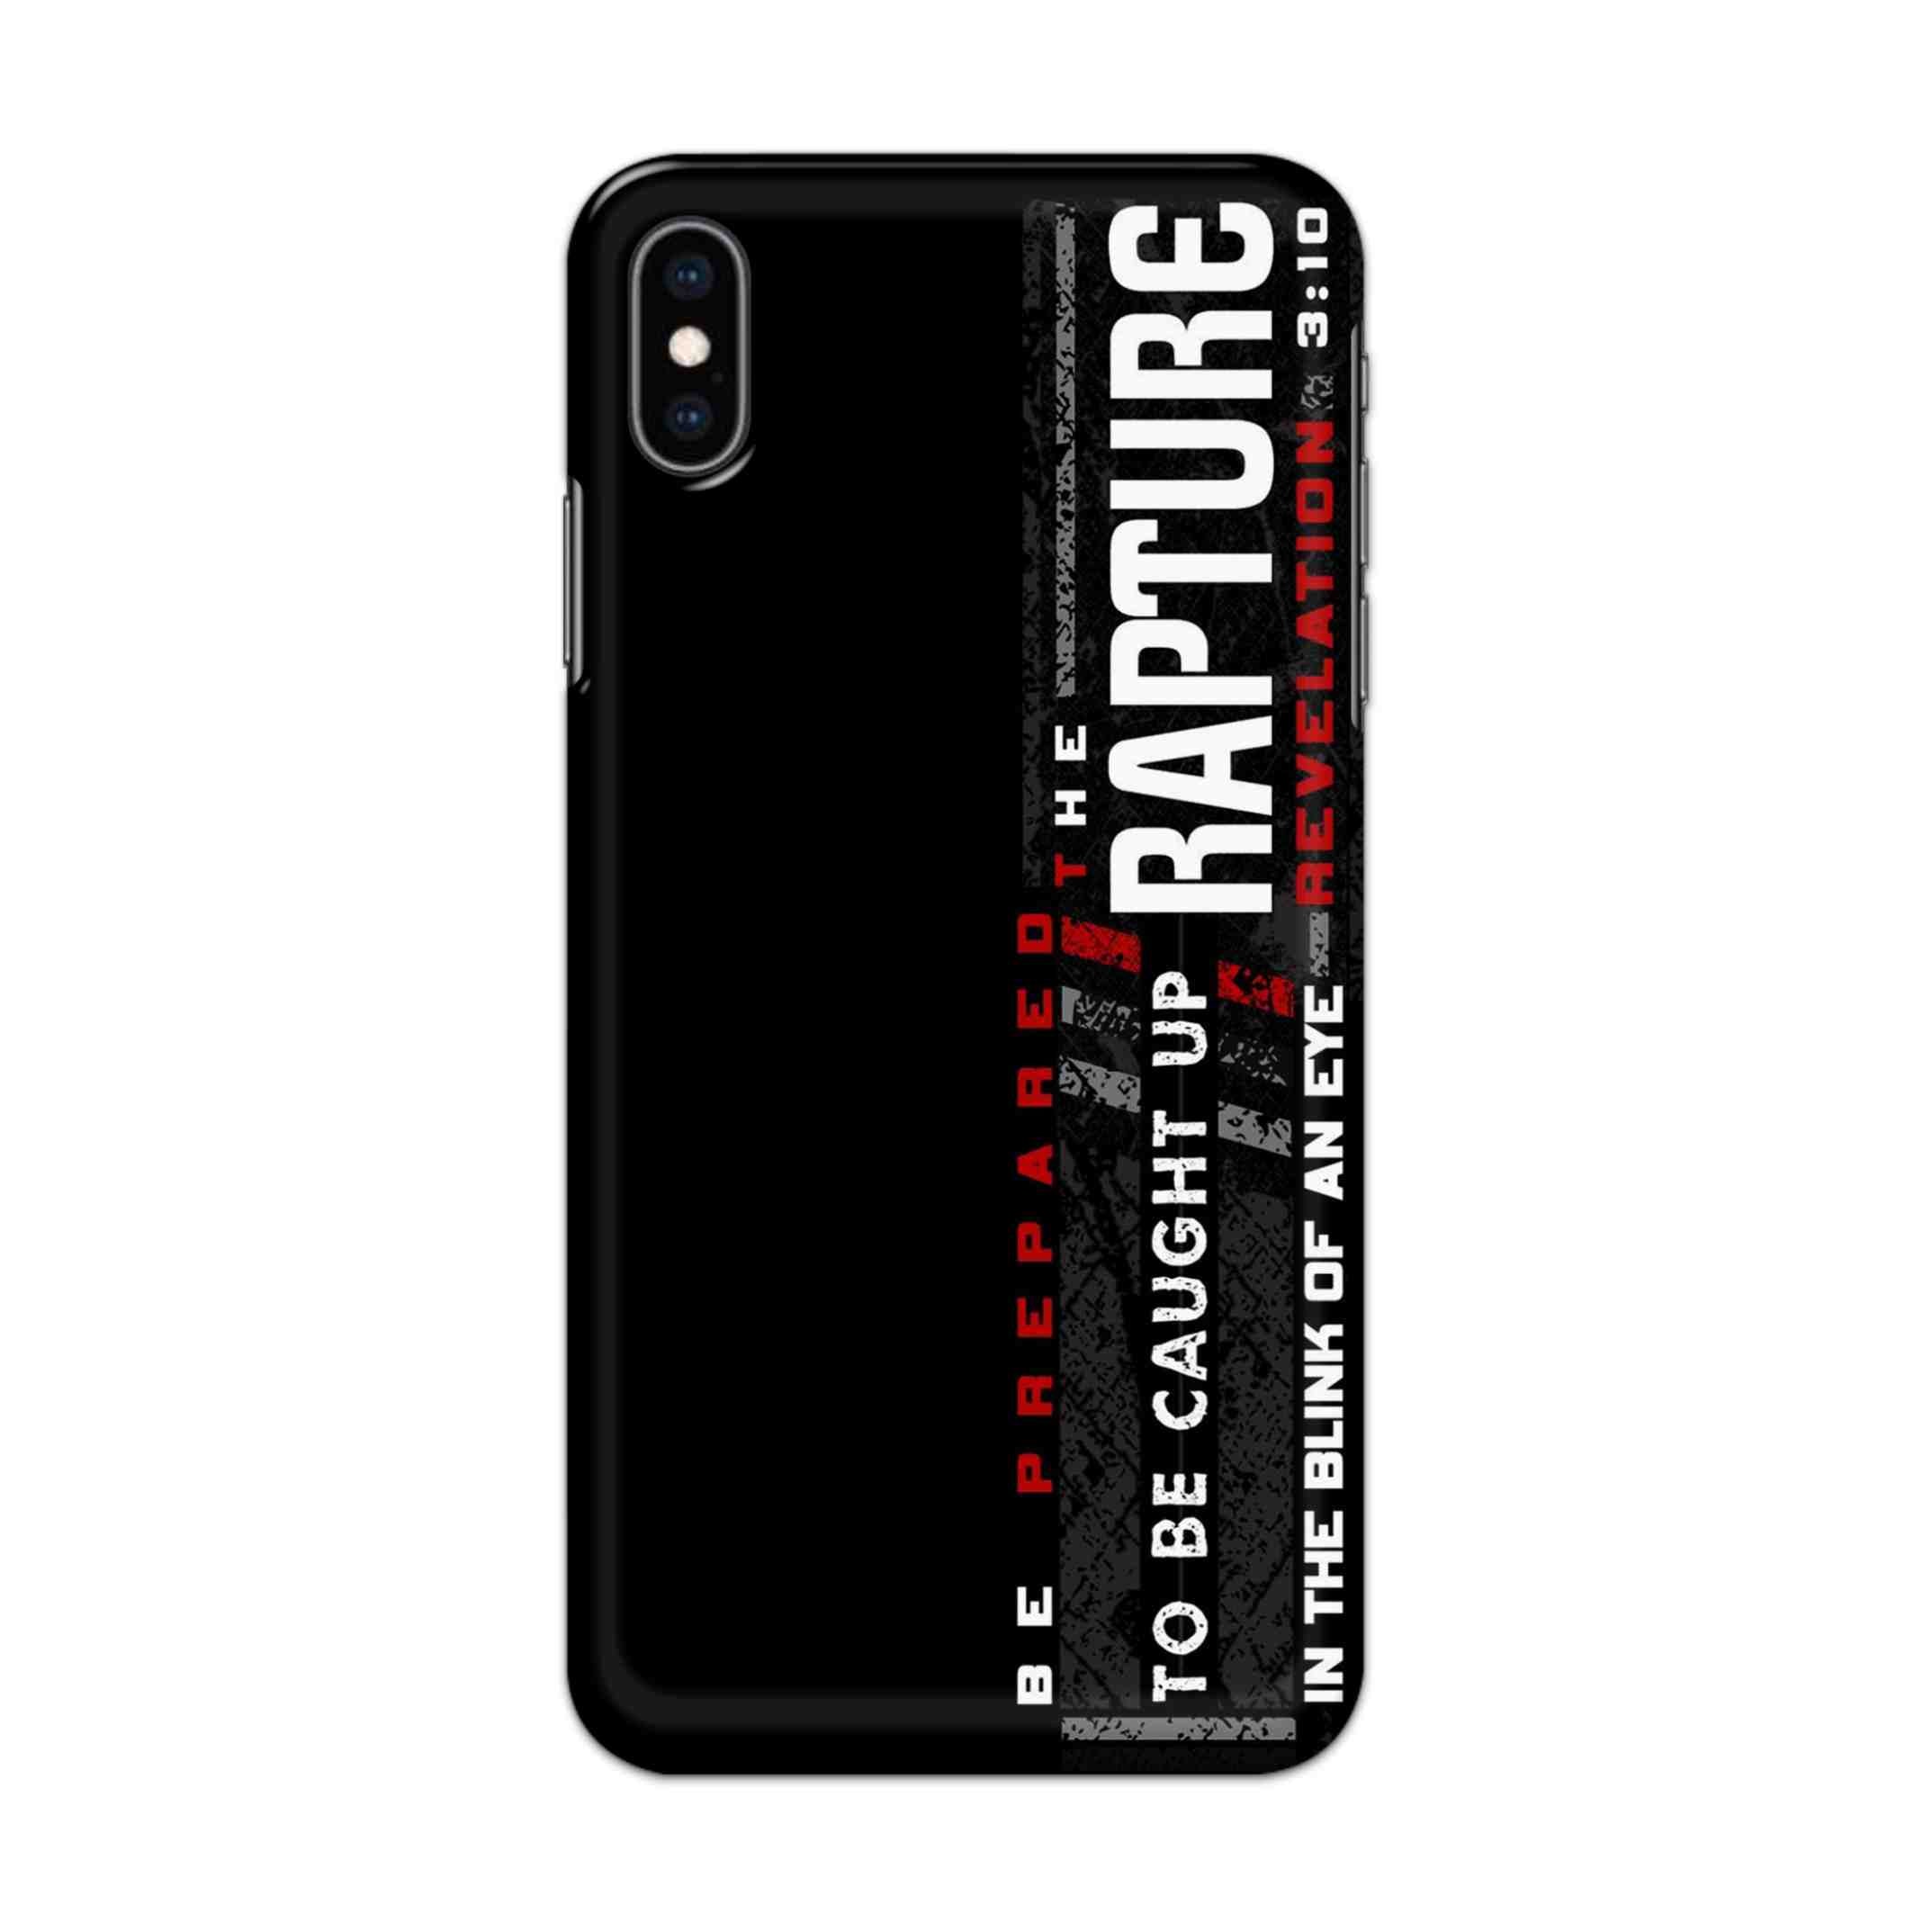 Buy Rapture Hard Back Mobile Phone Case/Cover For iPhone XS MAX Online